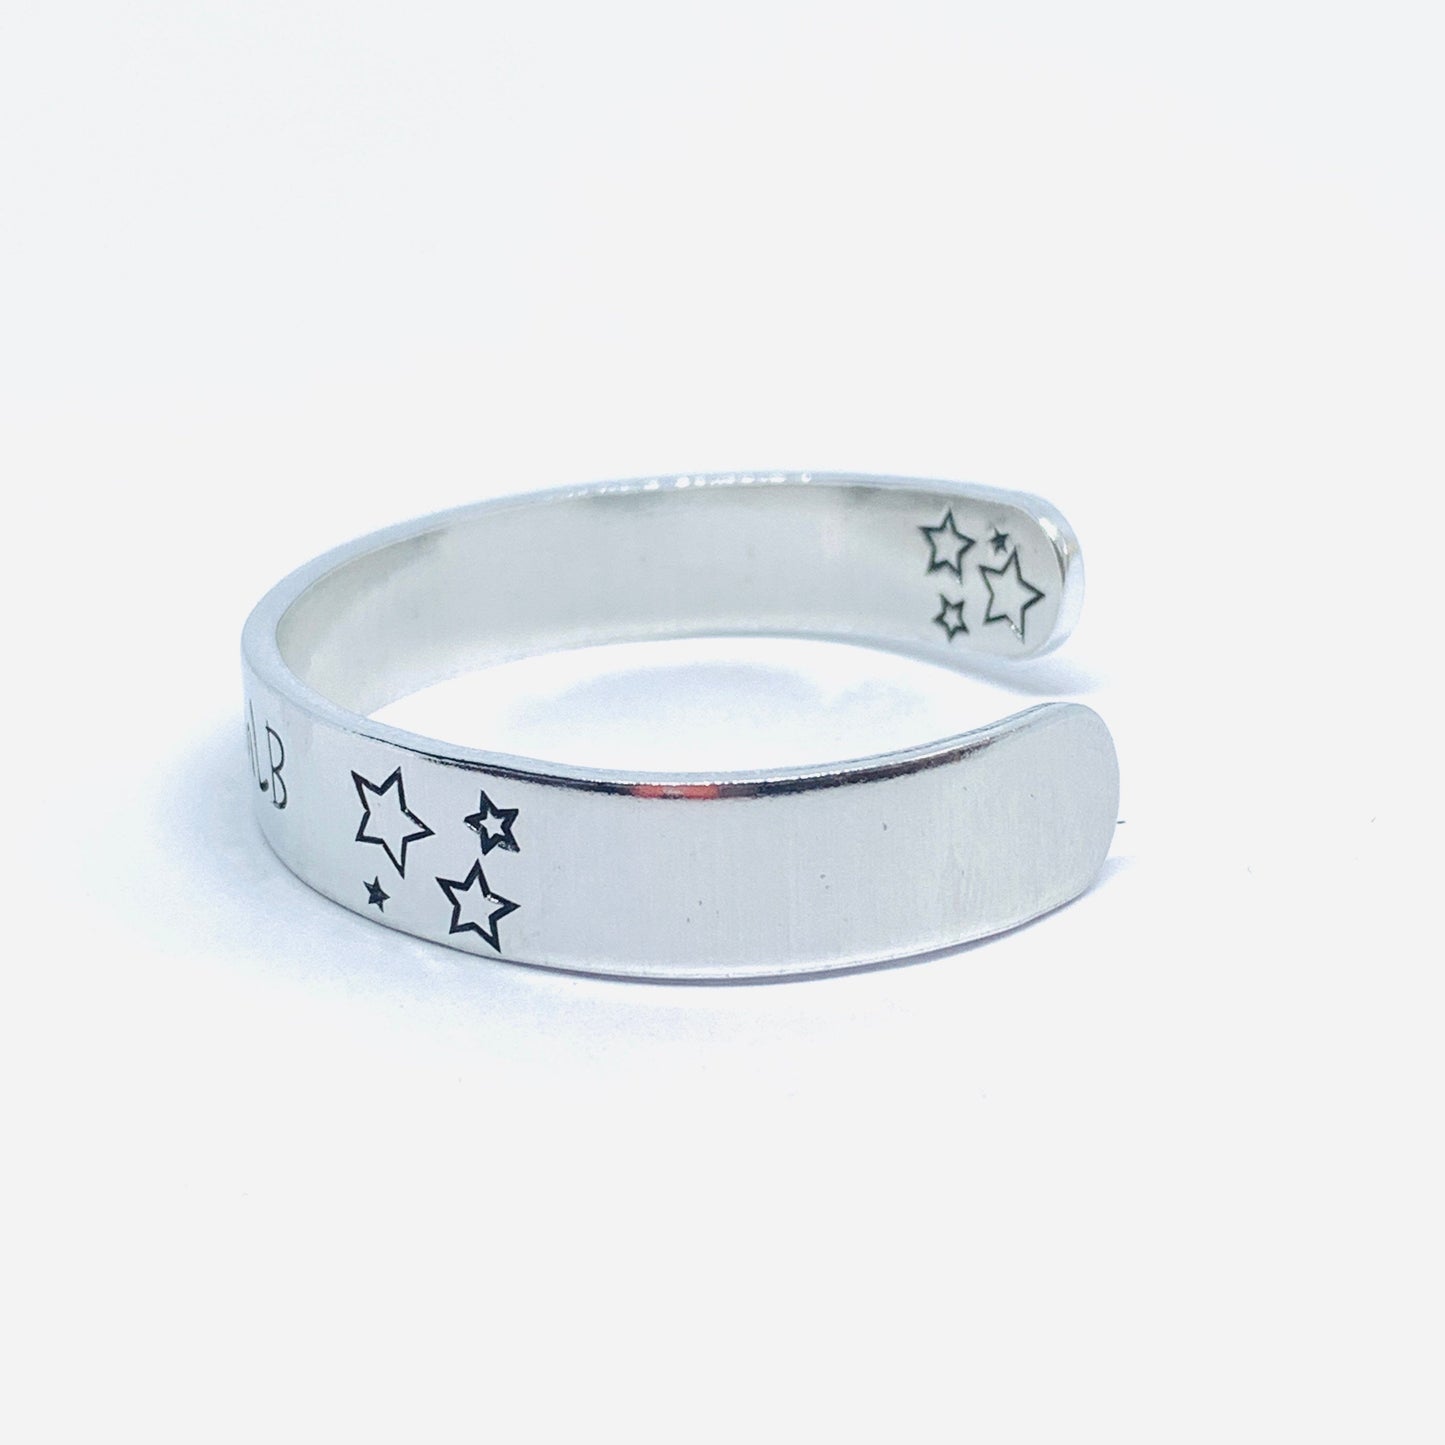 Peloton Inspired Leaderboard Handle - Hand Stamped Cuff Bracelet - Personalize Me!